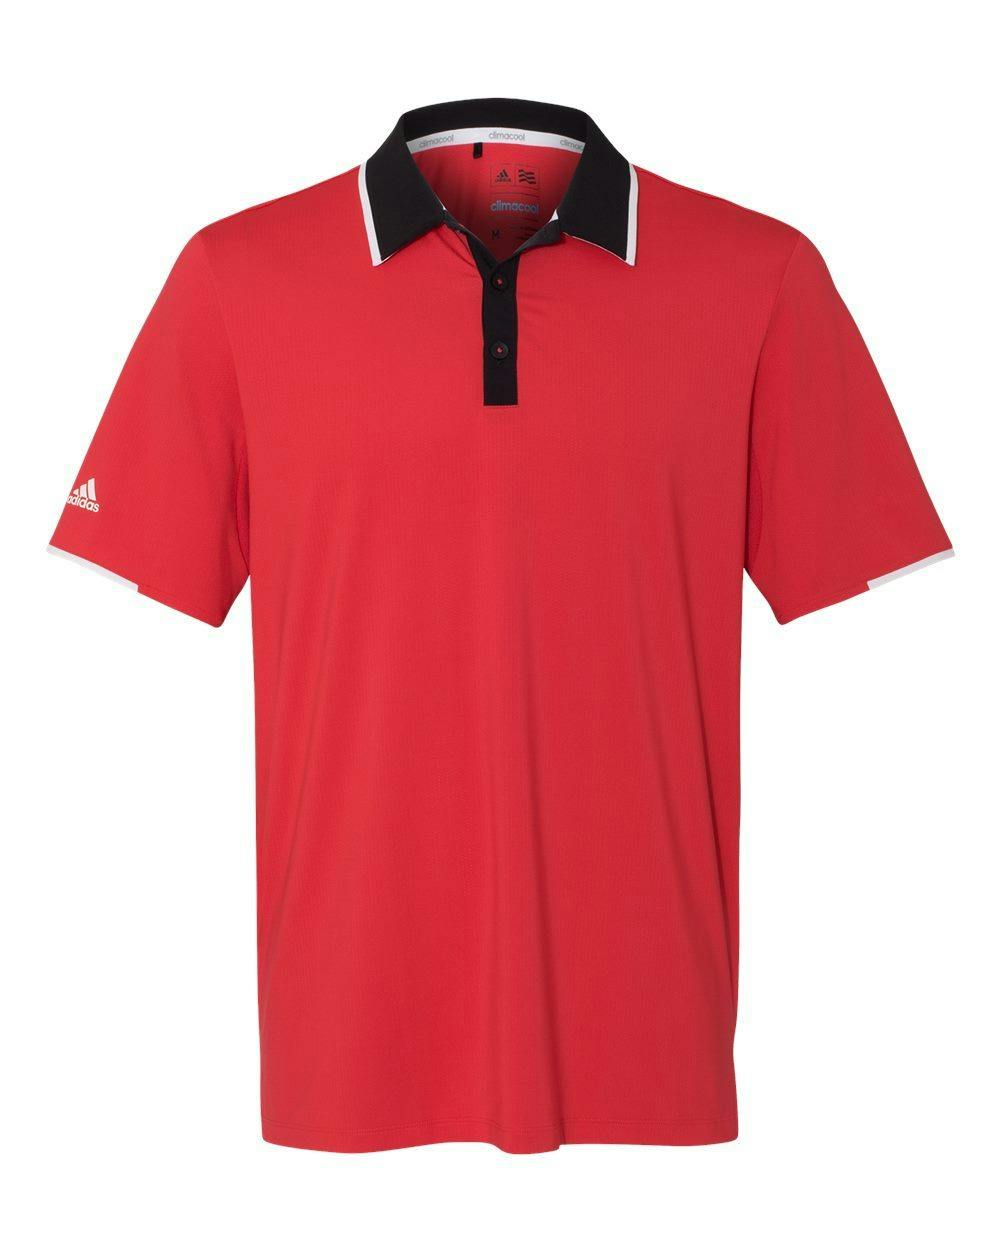 Image for Performance Colorblocked Polo - A166